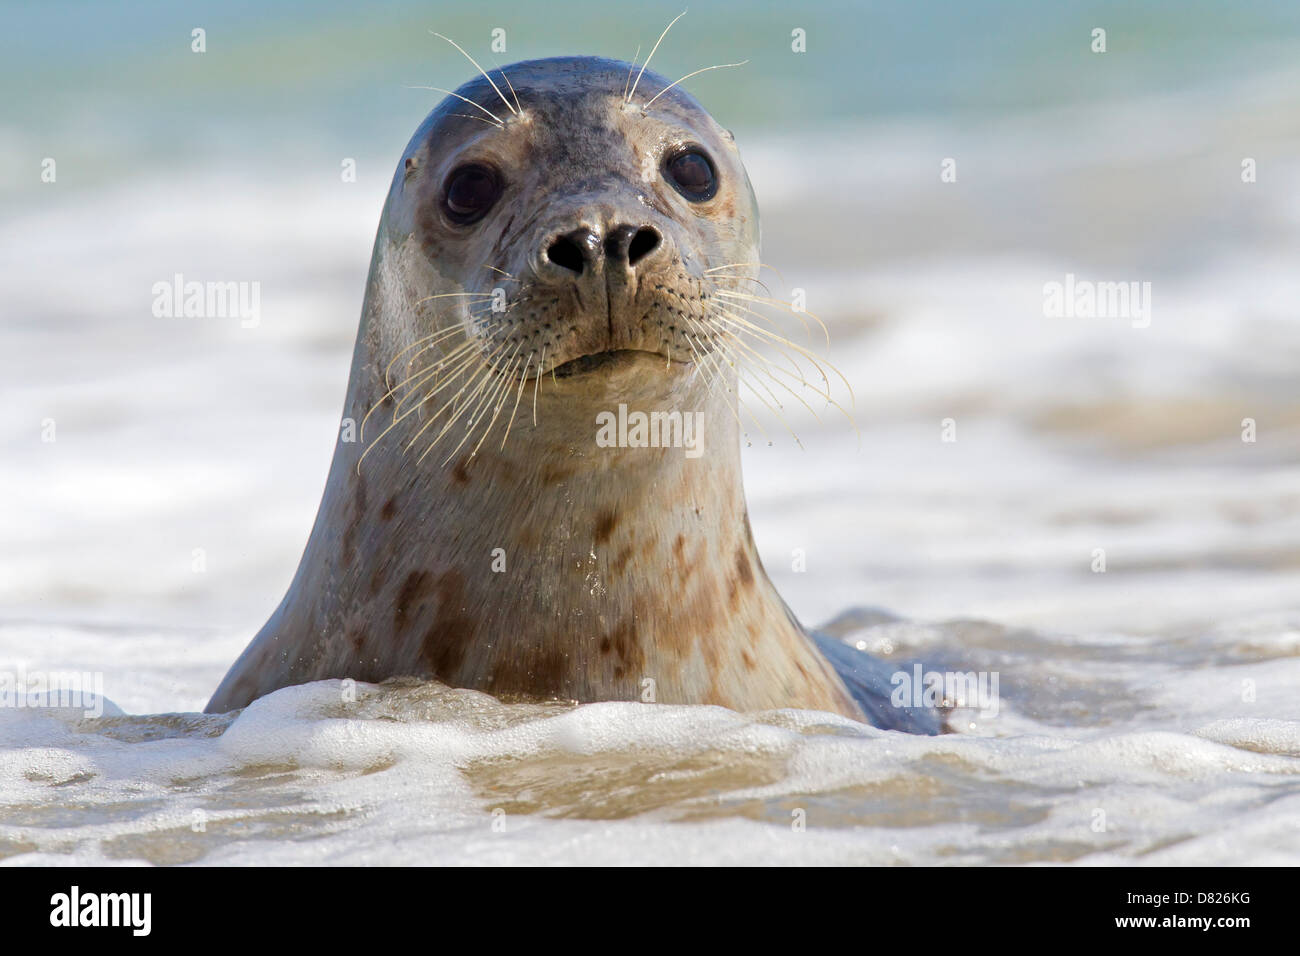 Common seal / Harbour seal (Phoca vitulina) close up in surf Stock Photo